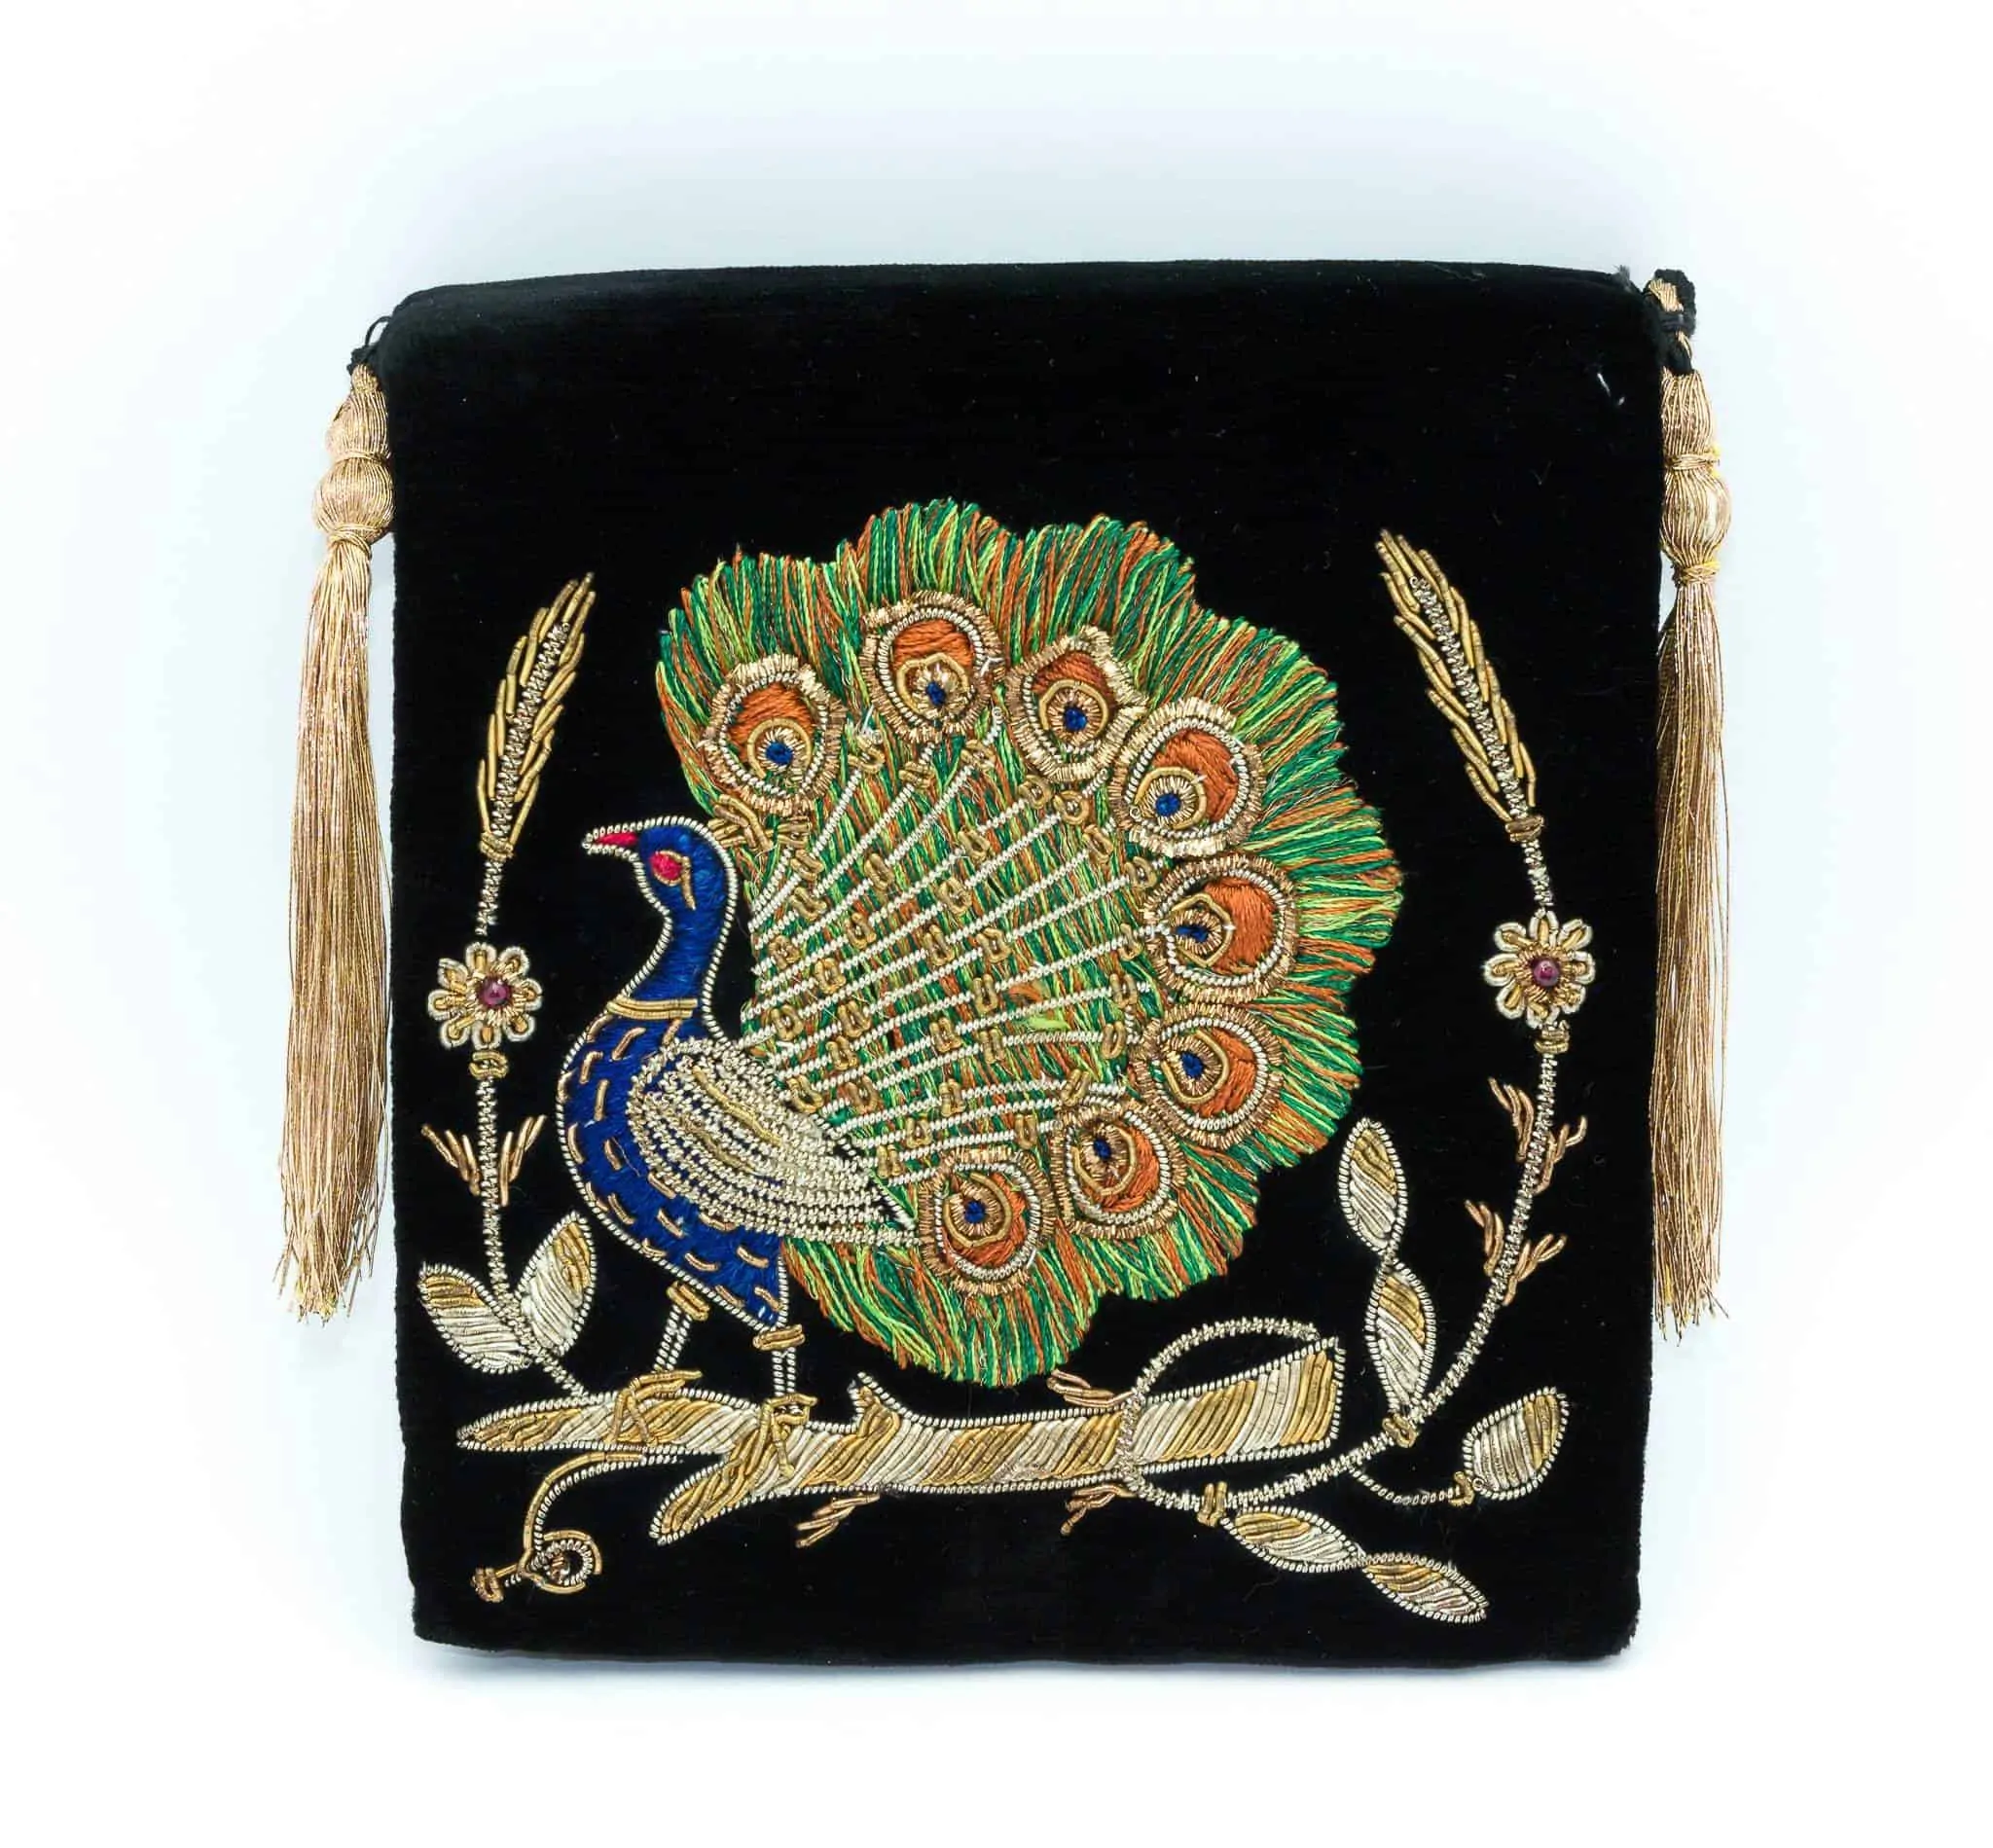 Vintage Gold Embroidered Clutch Evening Purse India | eBay